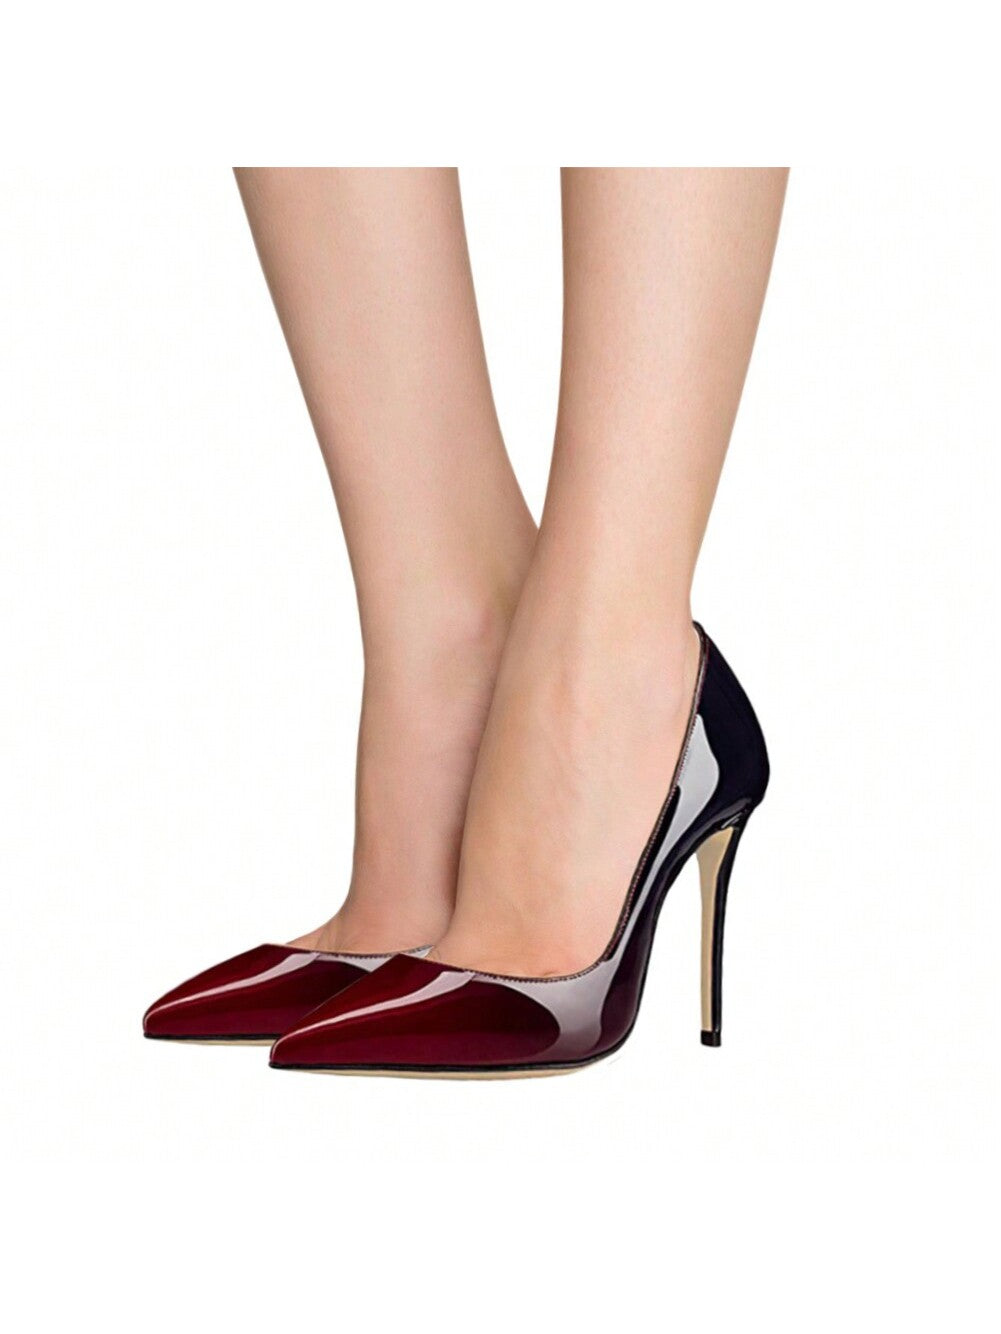 Elegant Two-Tone Patent Pointed Toe Stiletto High Heel Pumps